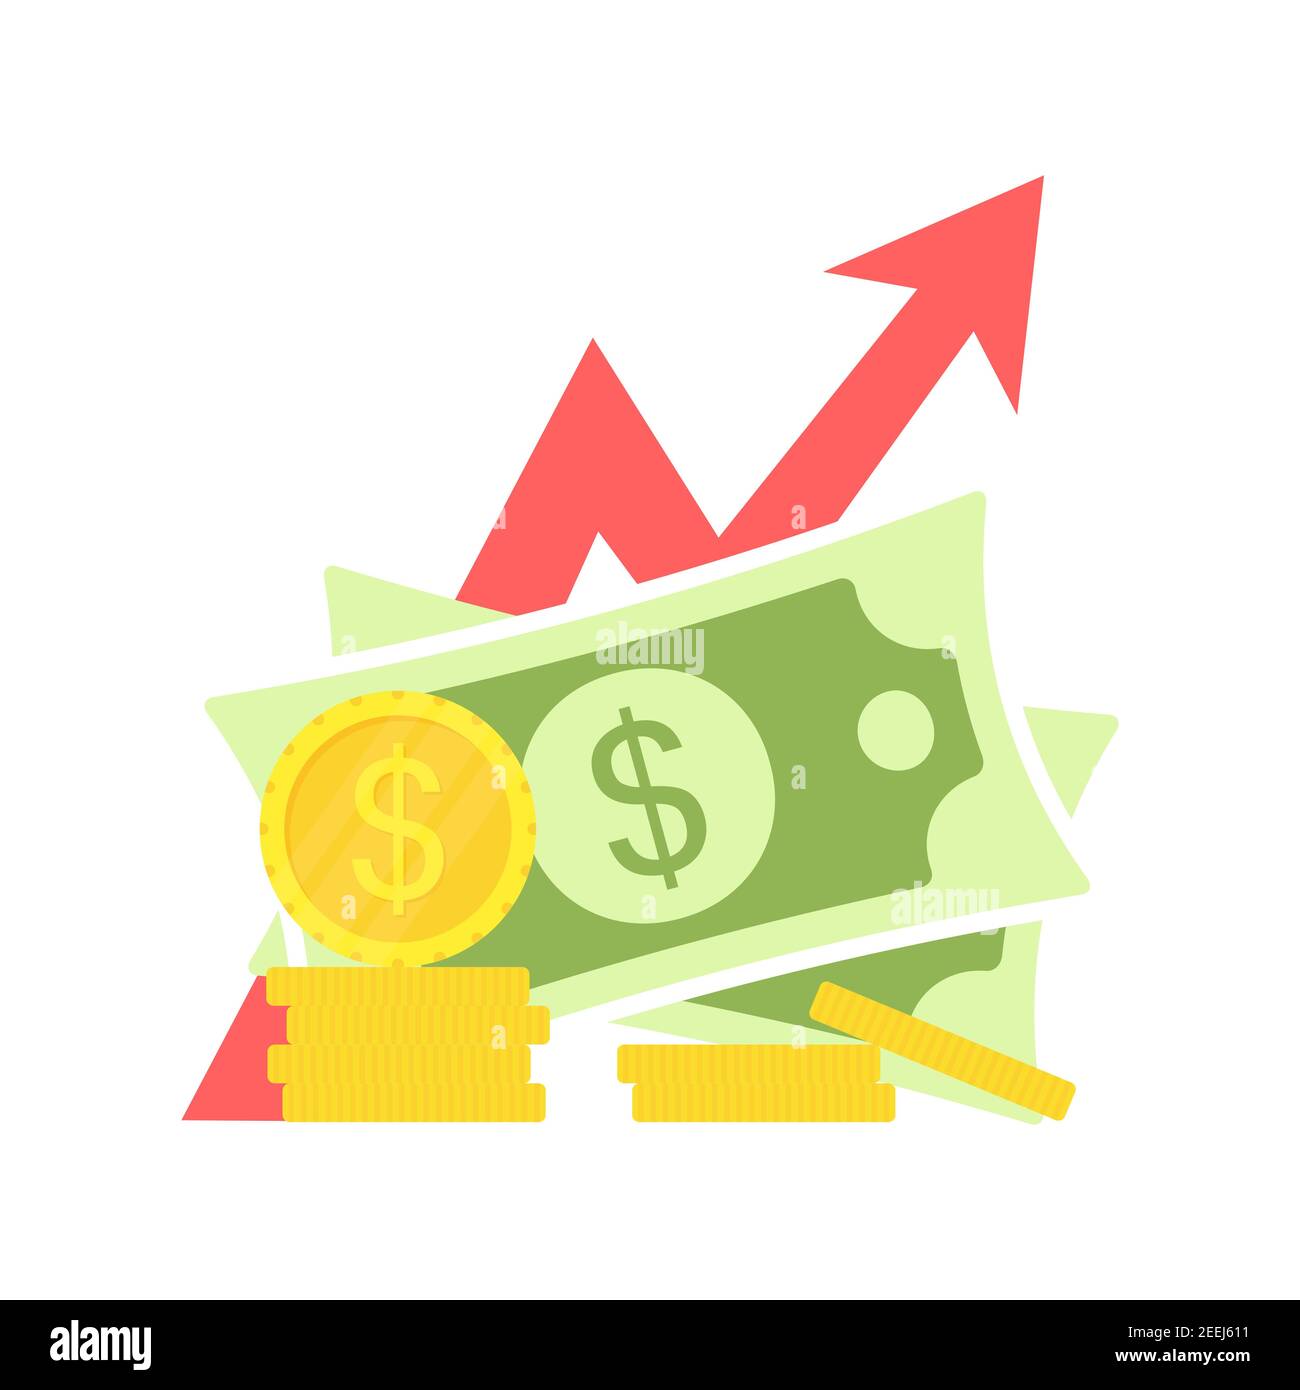 Retirement money with arrow. Dollar and coin symbol. Business success strategy concept. Vector illustration isolated on white. Stock Vector